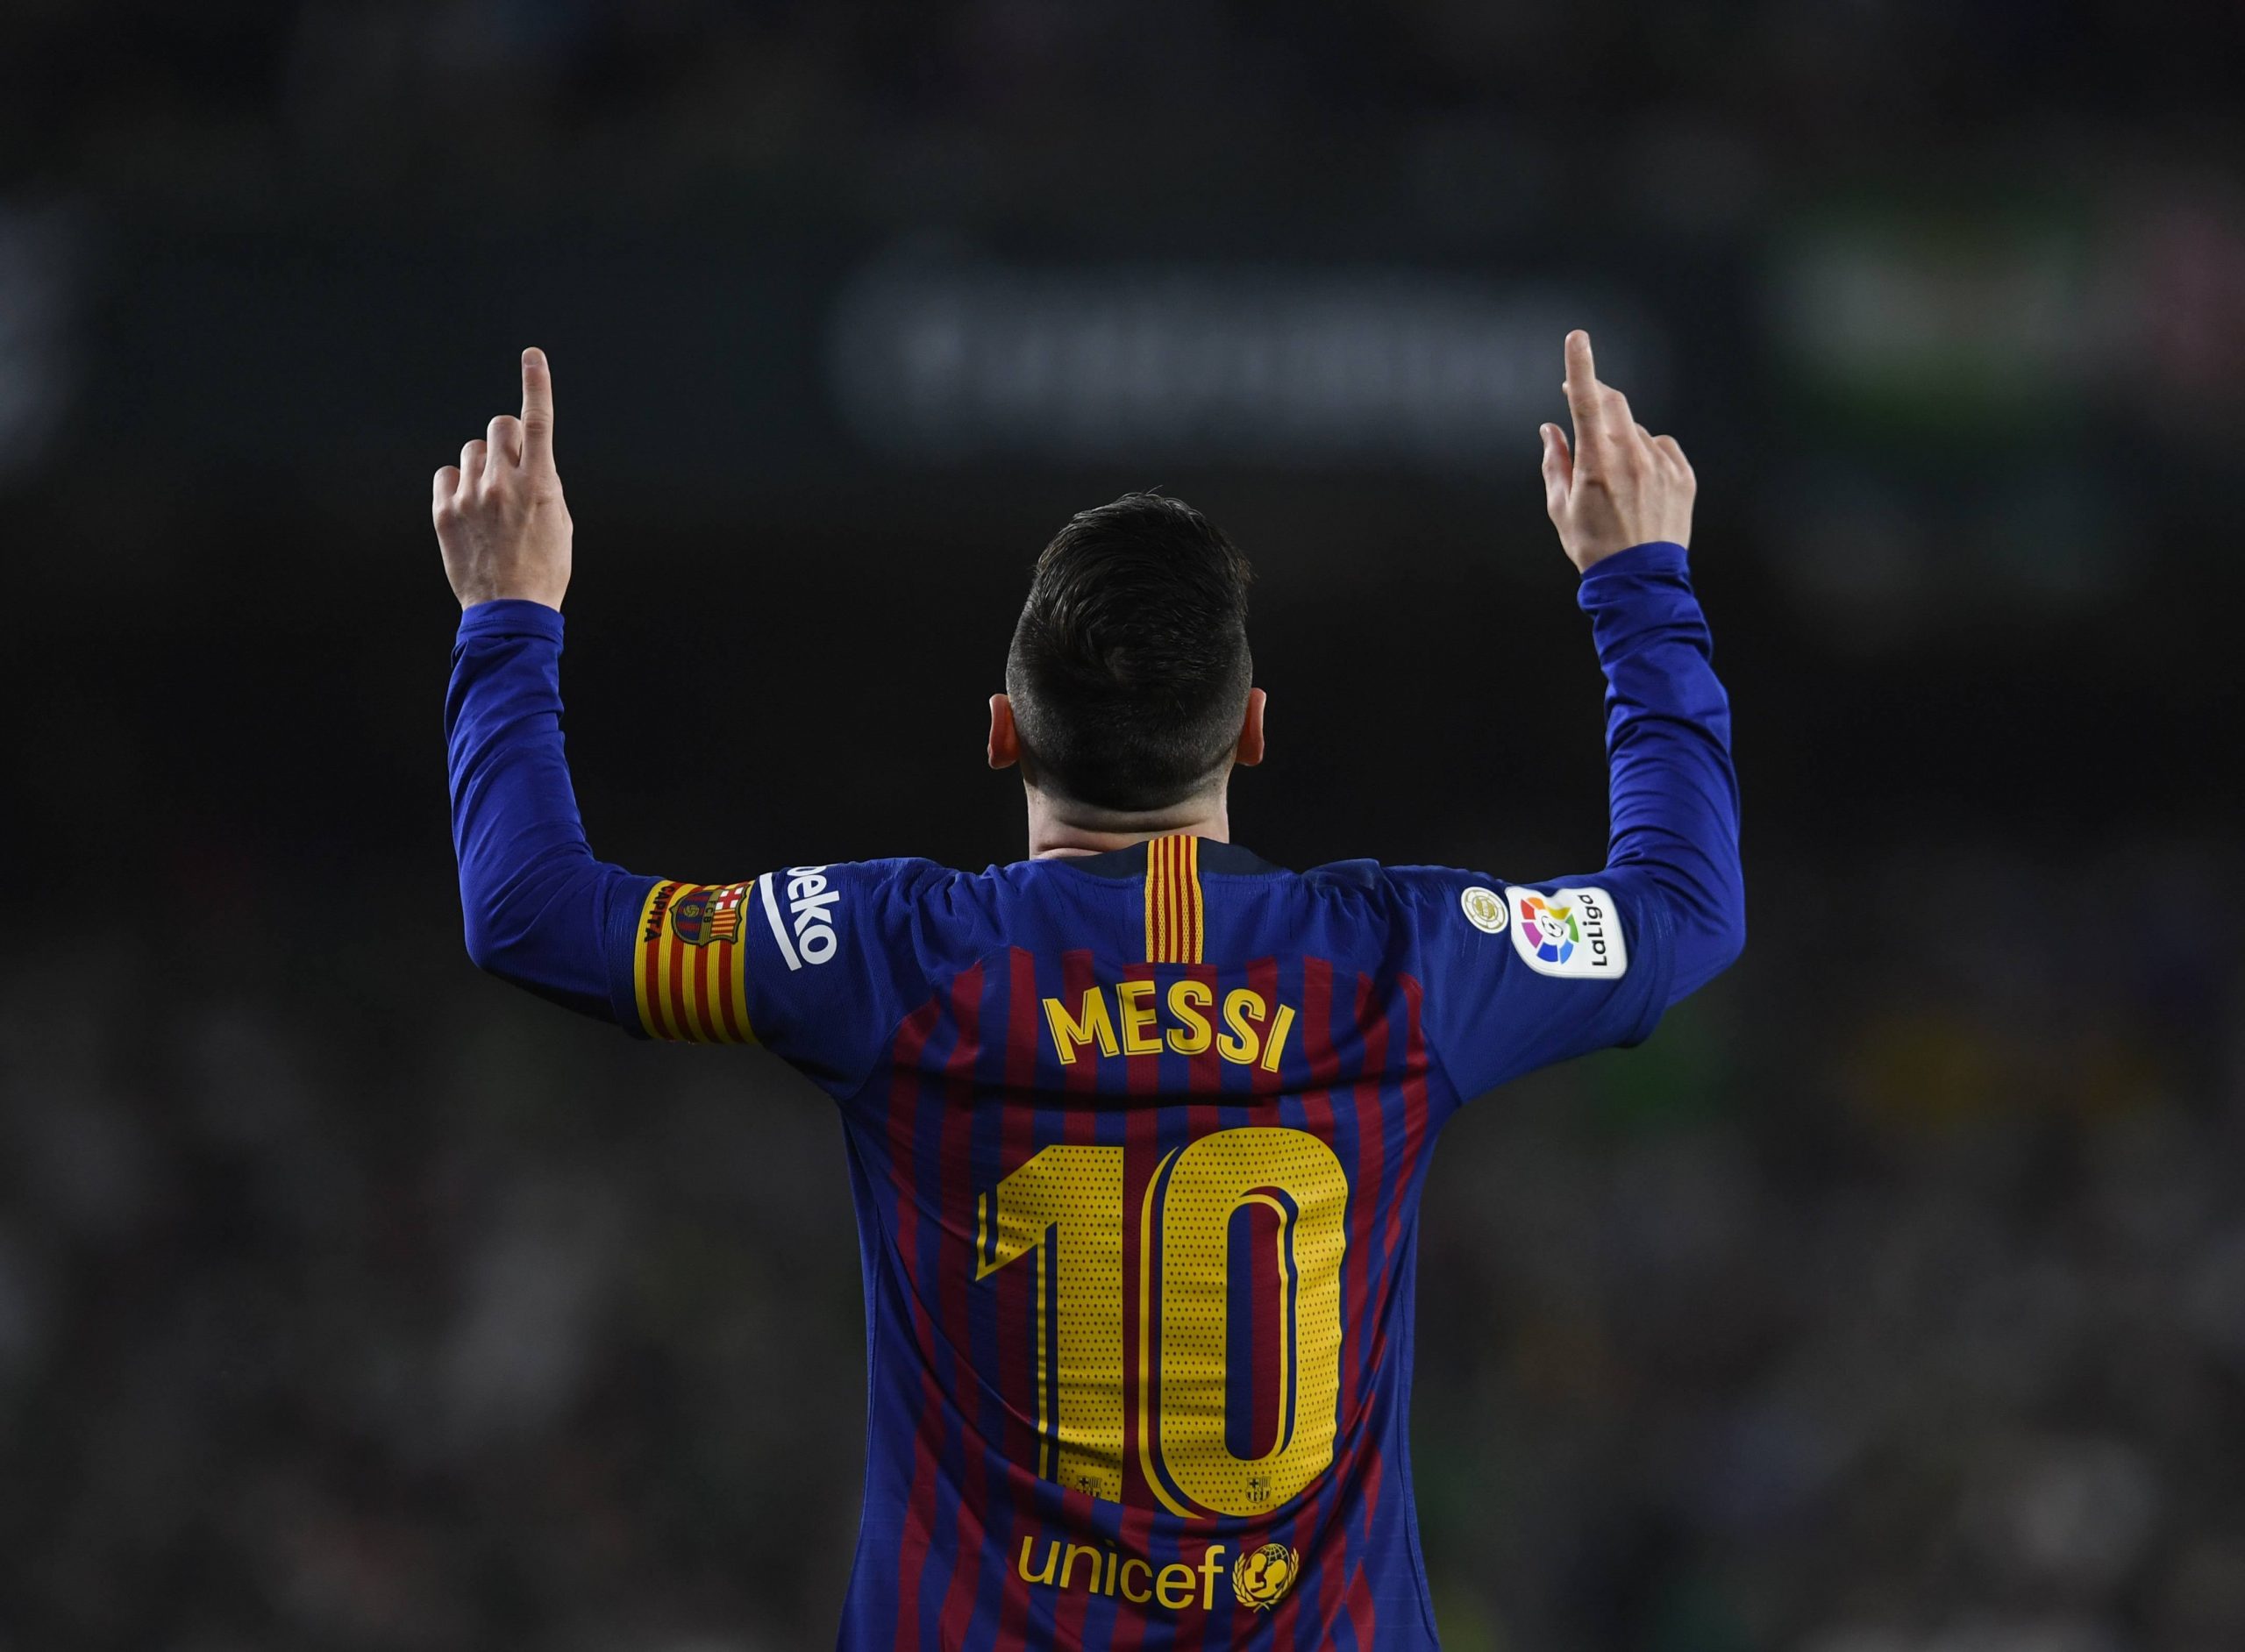 Messi Moments with Álex Delmás: Real Betis 1 - 4 Barcelona, March 2019